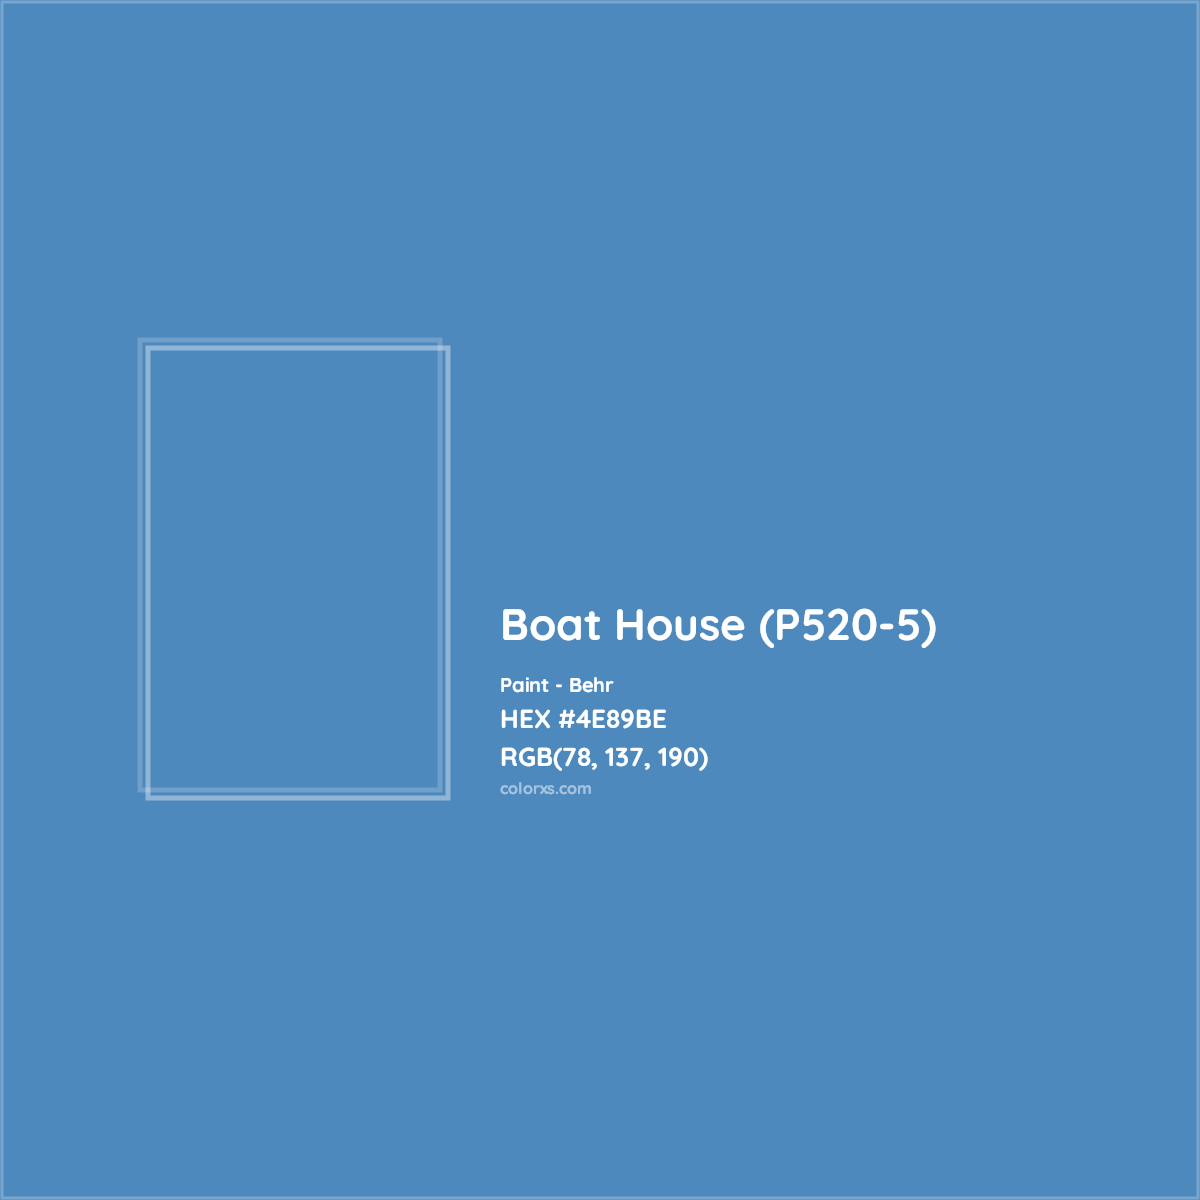 HEX #4E89BE Boat House (P520-5) Paint Behr - Color Code